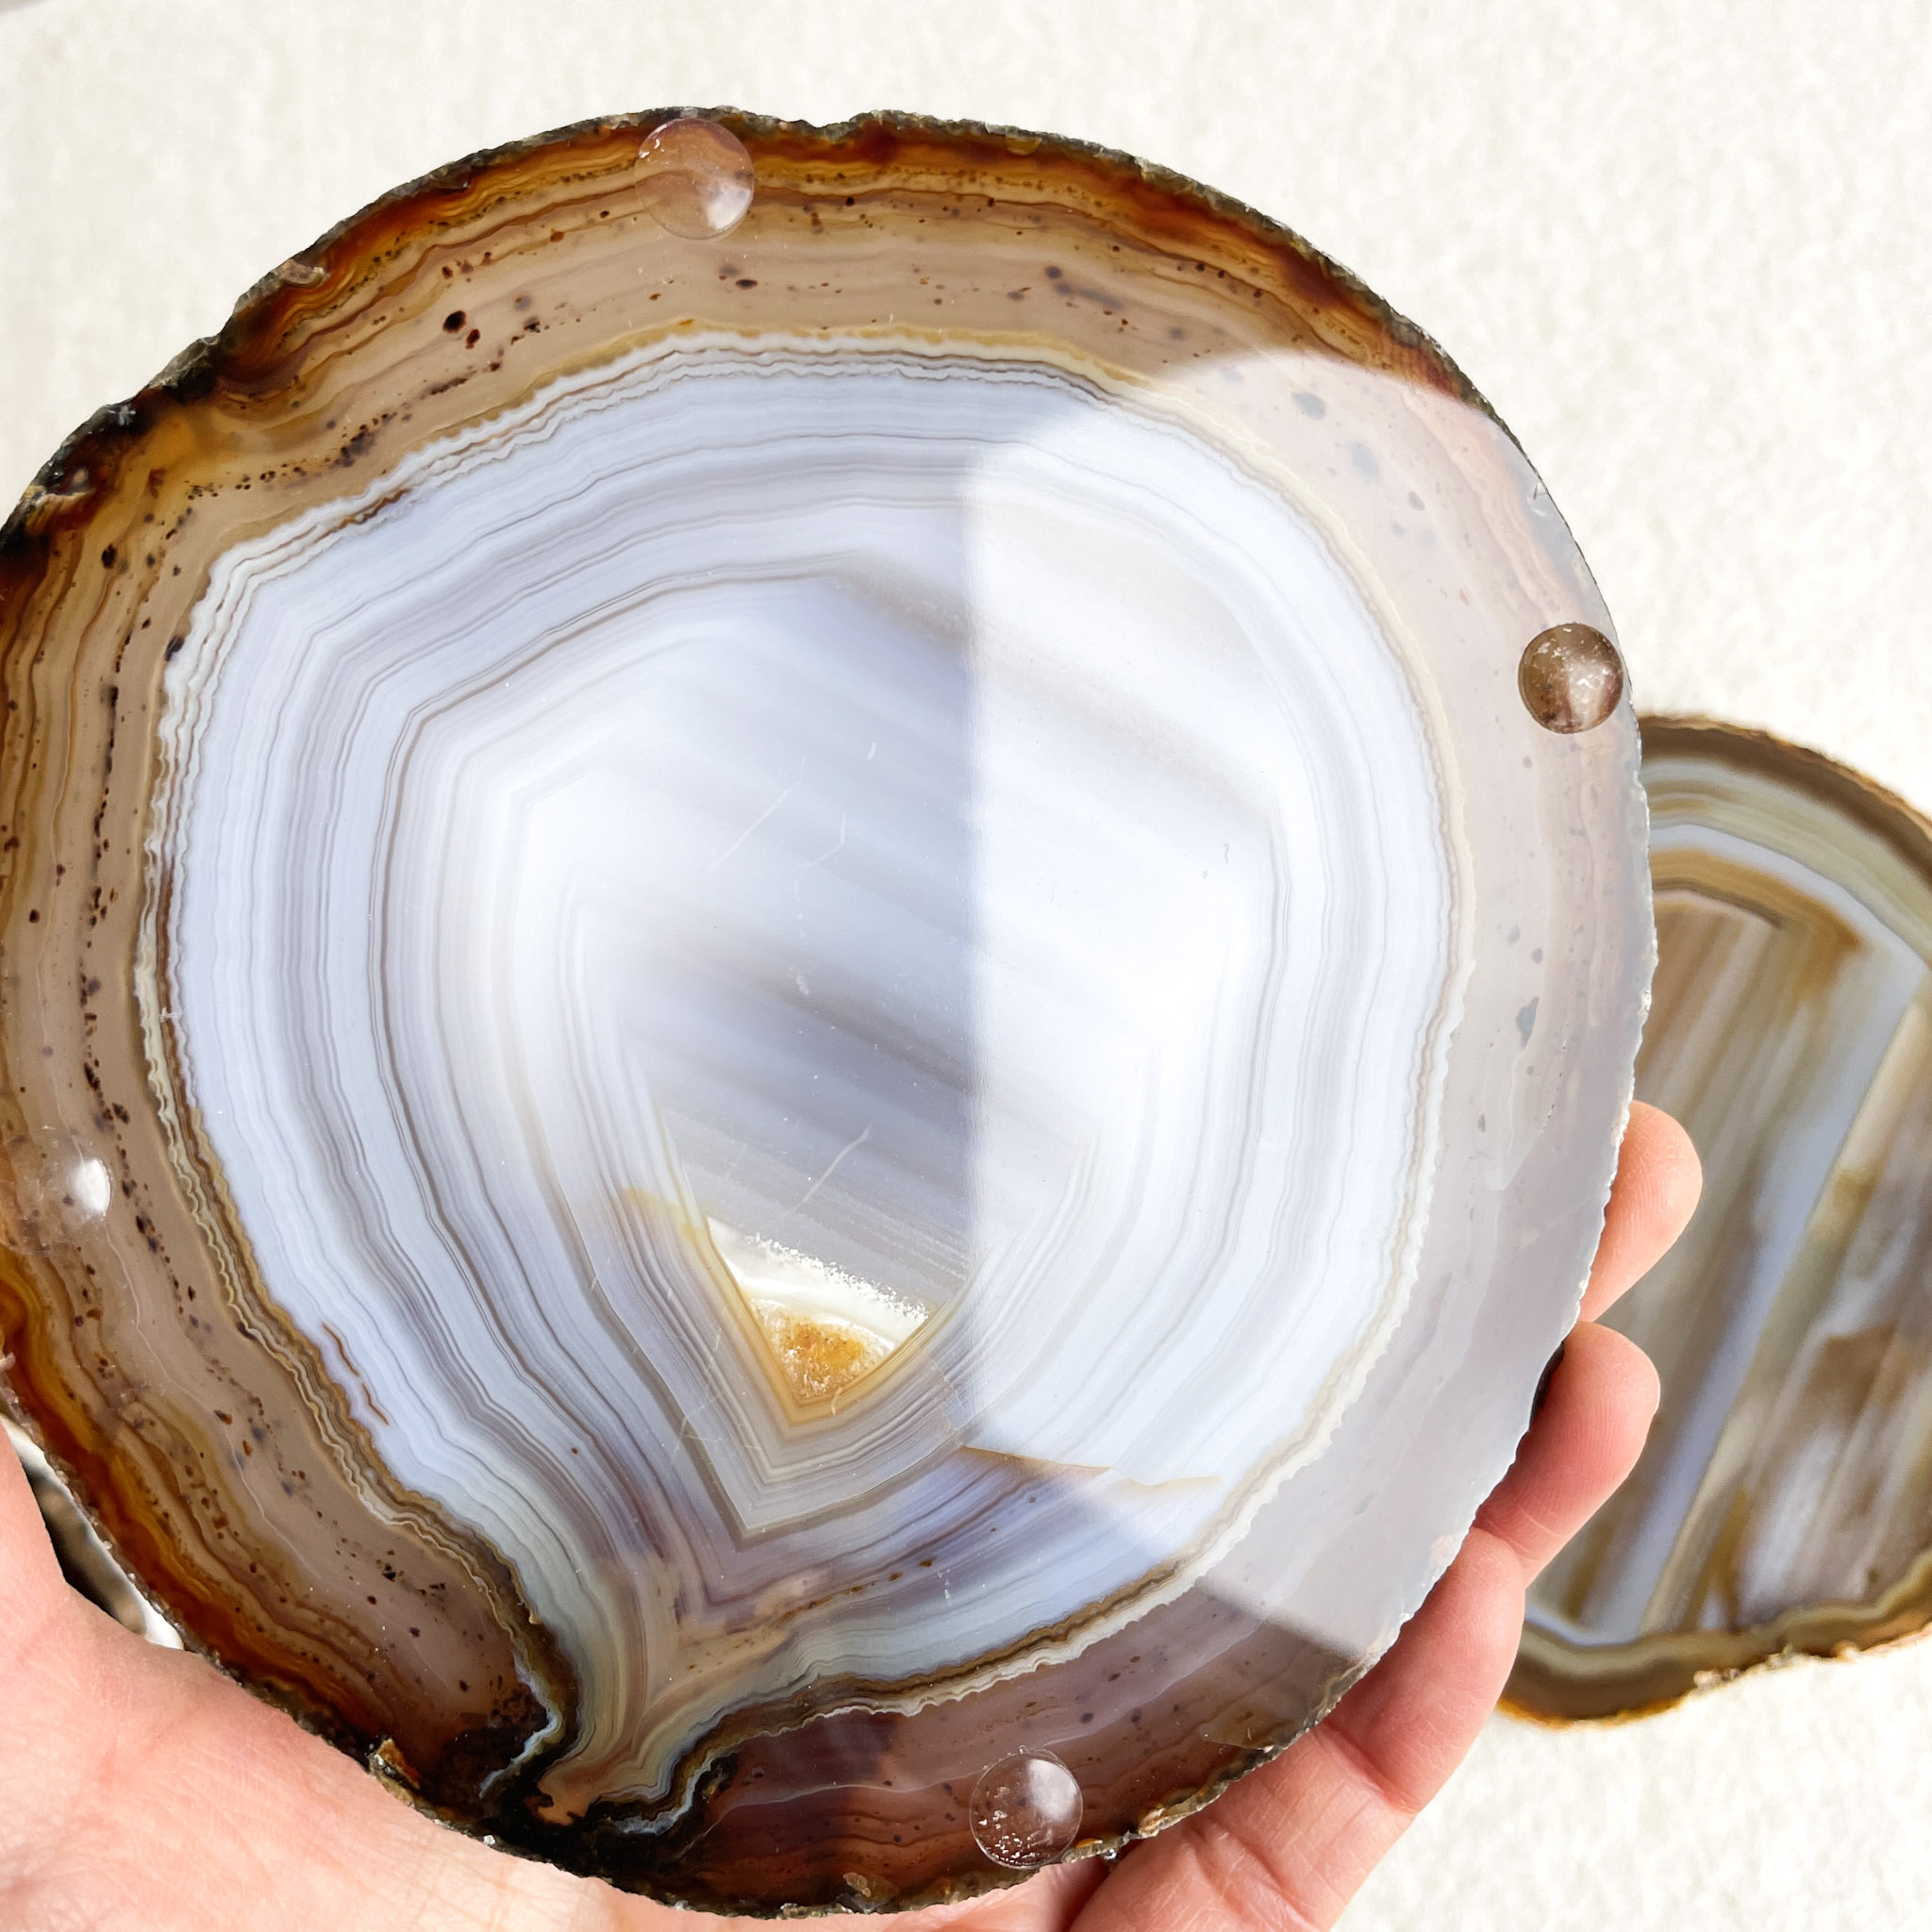 A person holding a polished agate slice showing concentric bands of brown and white colors with light reflections on its surface.